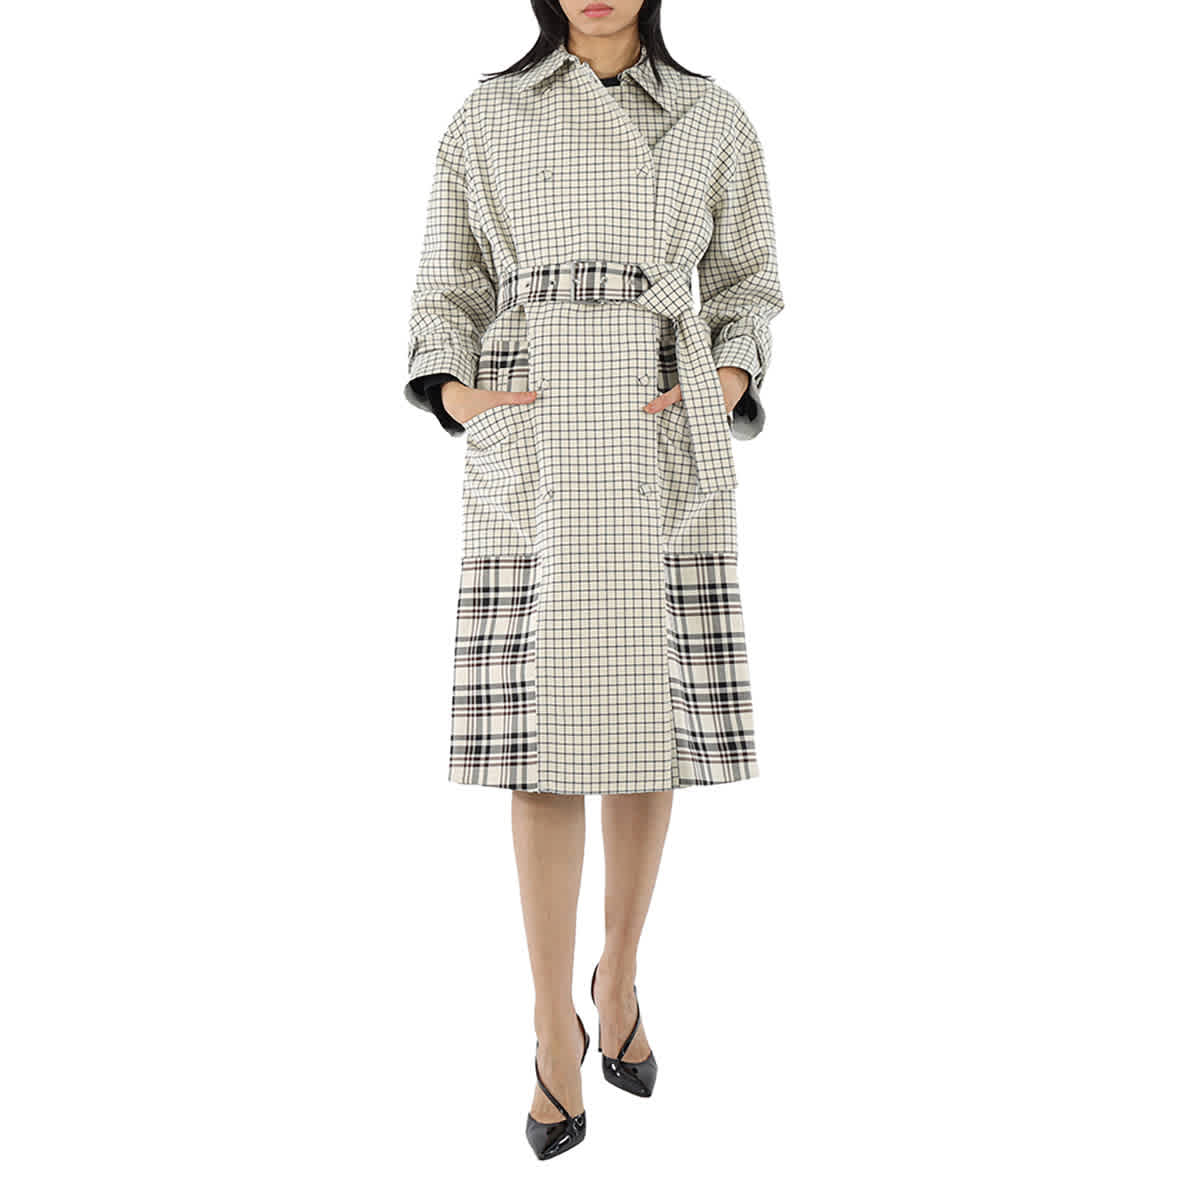 Proenza Schouler Ladies Windowpane Plaid Belted Trench Coat, Brand Size 4 - image 1 of 1